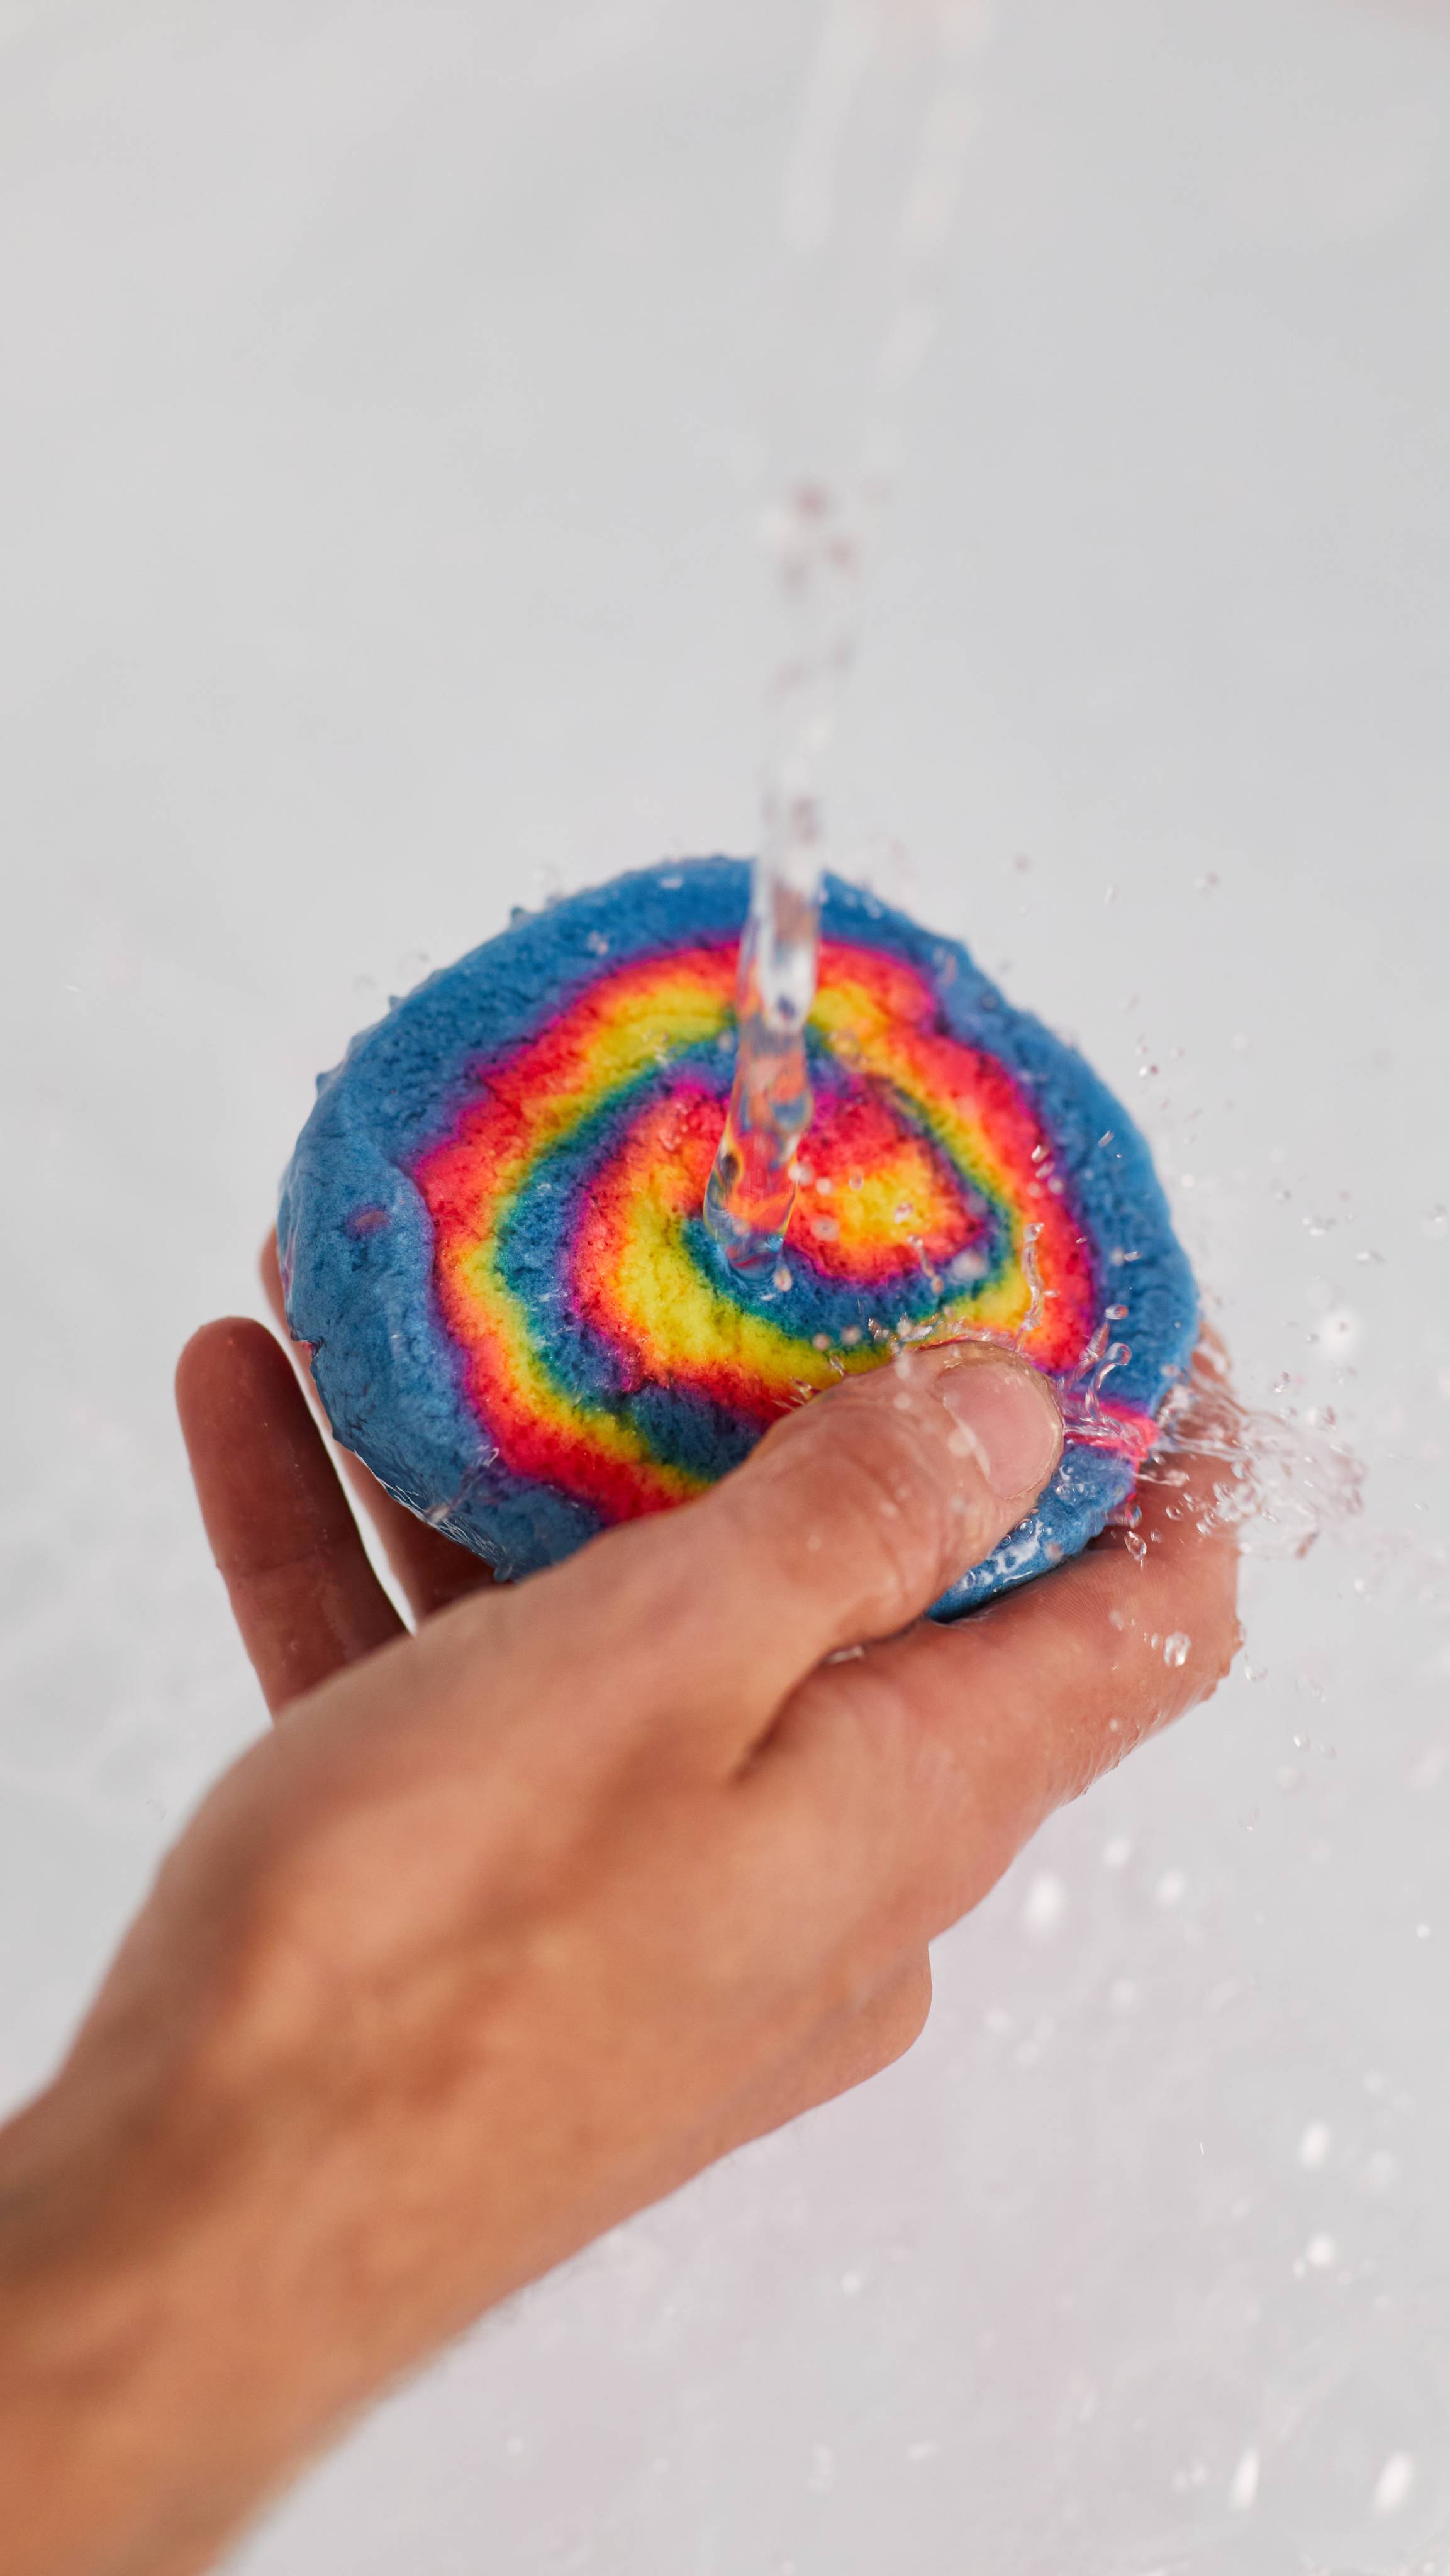 Image shows a close-up of the model's hand holding the Intergalactic bubble bar under running tap water.